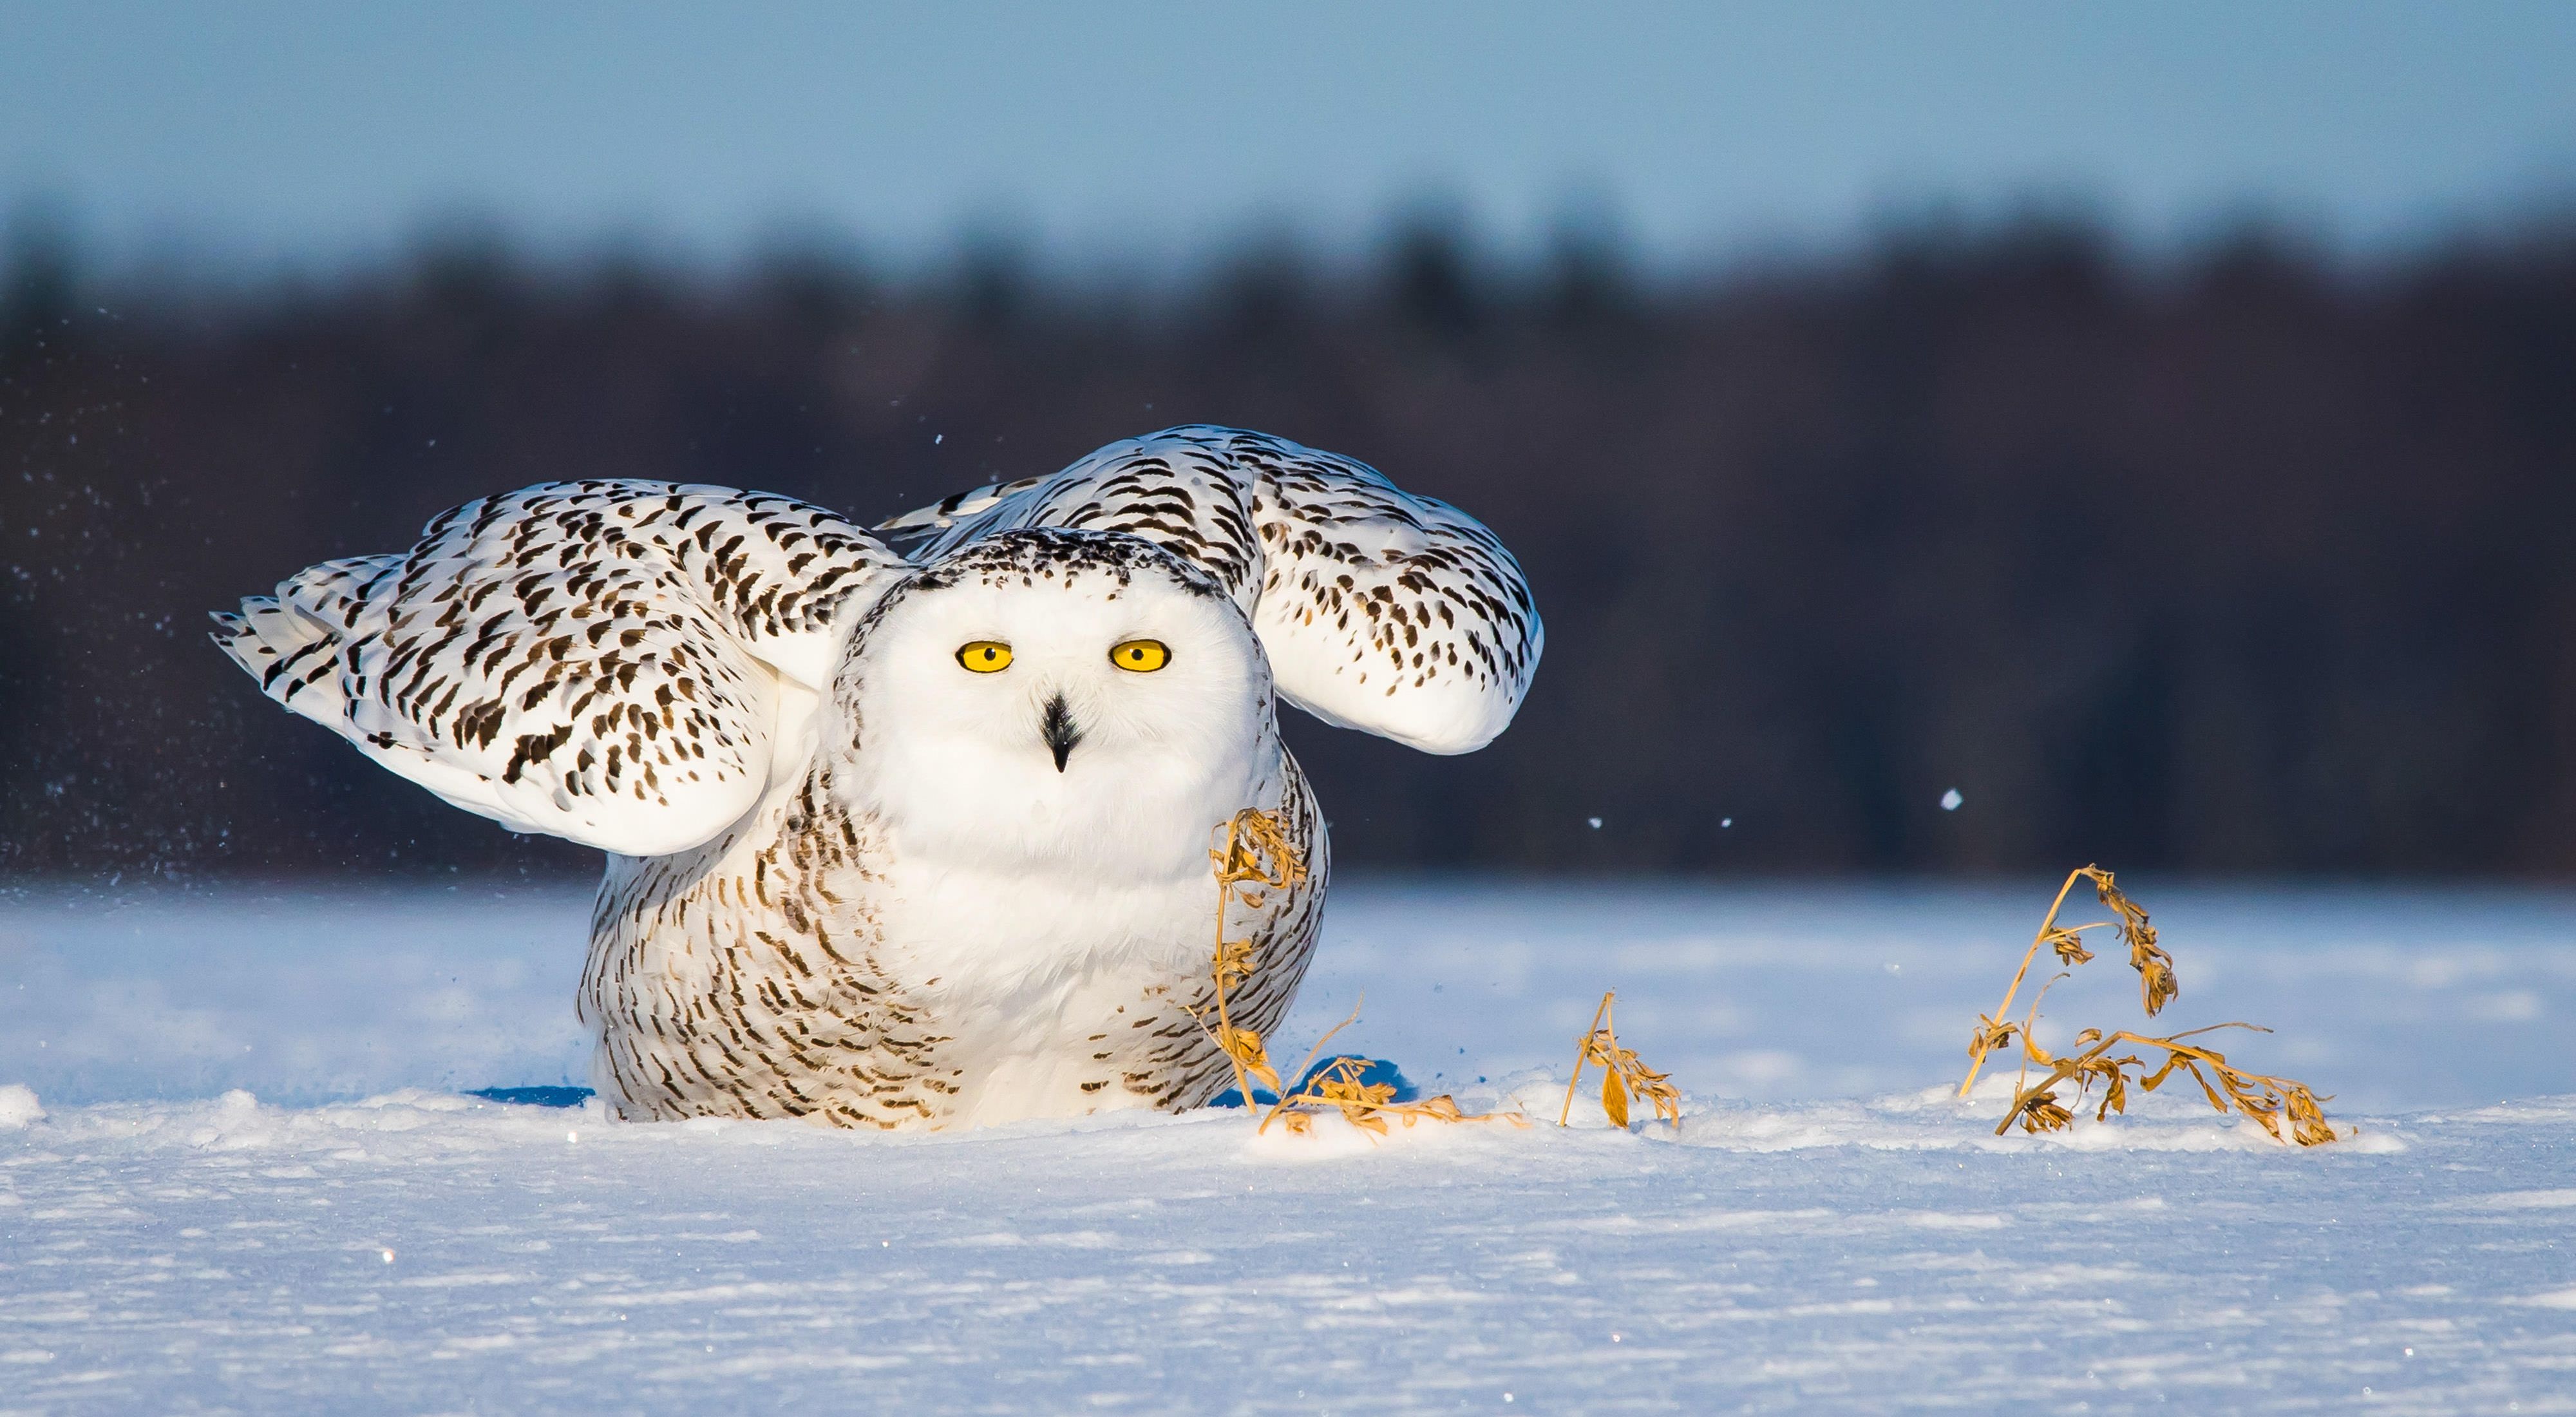 In recent years, snowy owls have shown up in Wisconsin in large numbers.